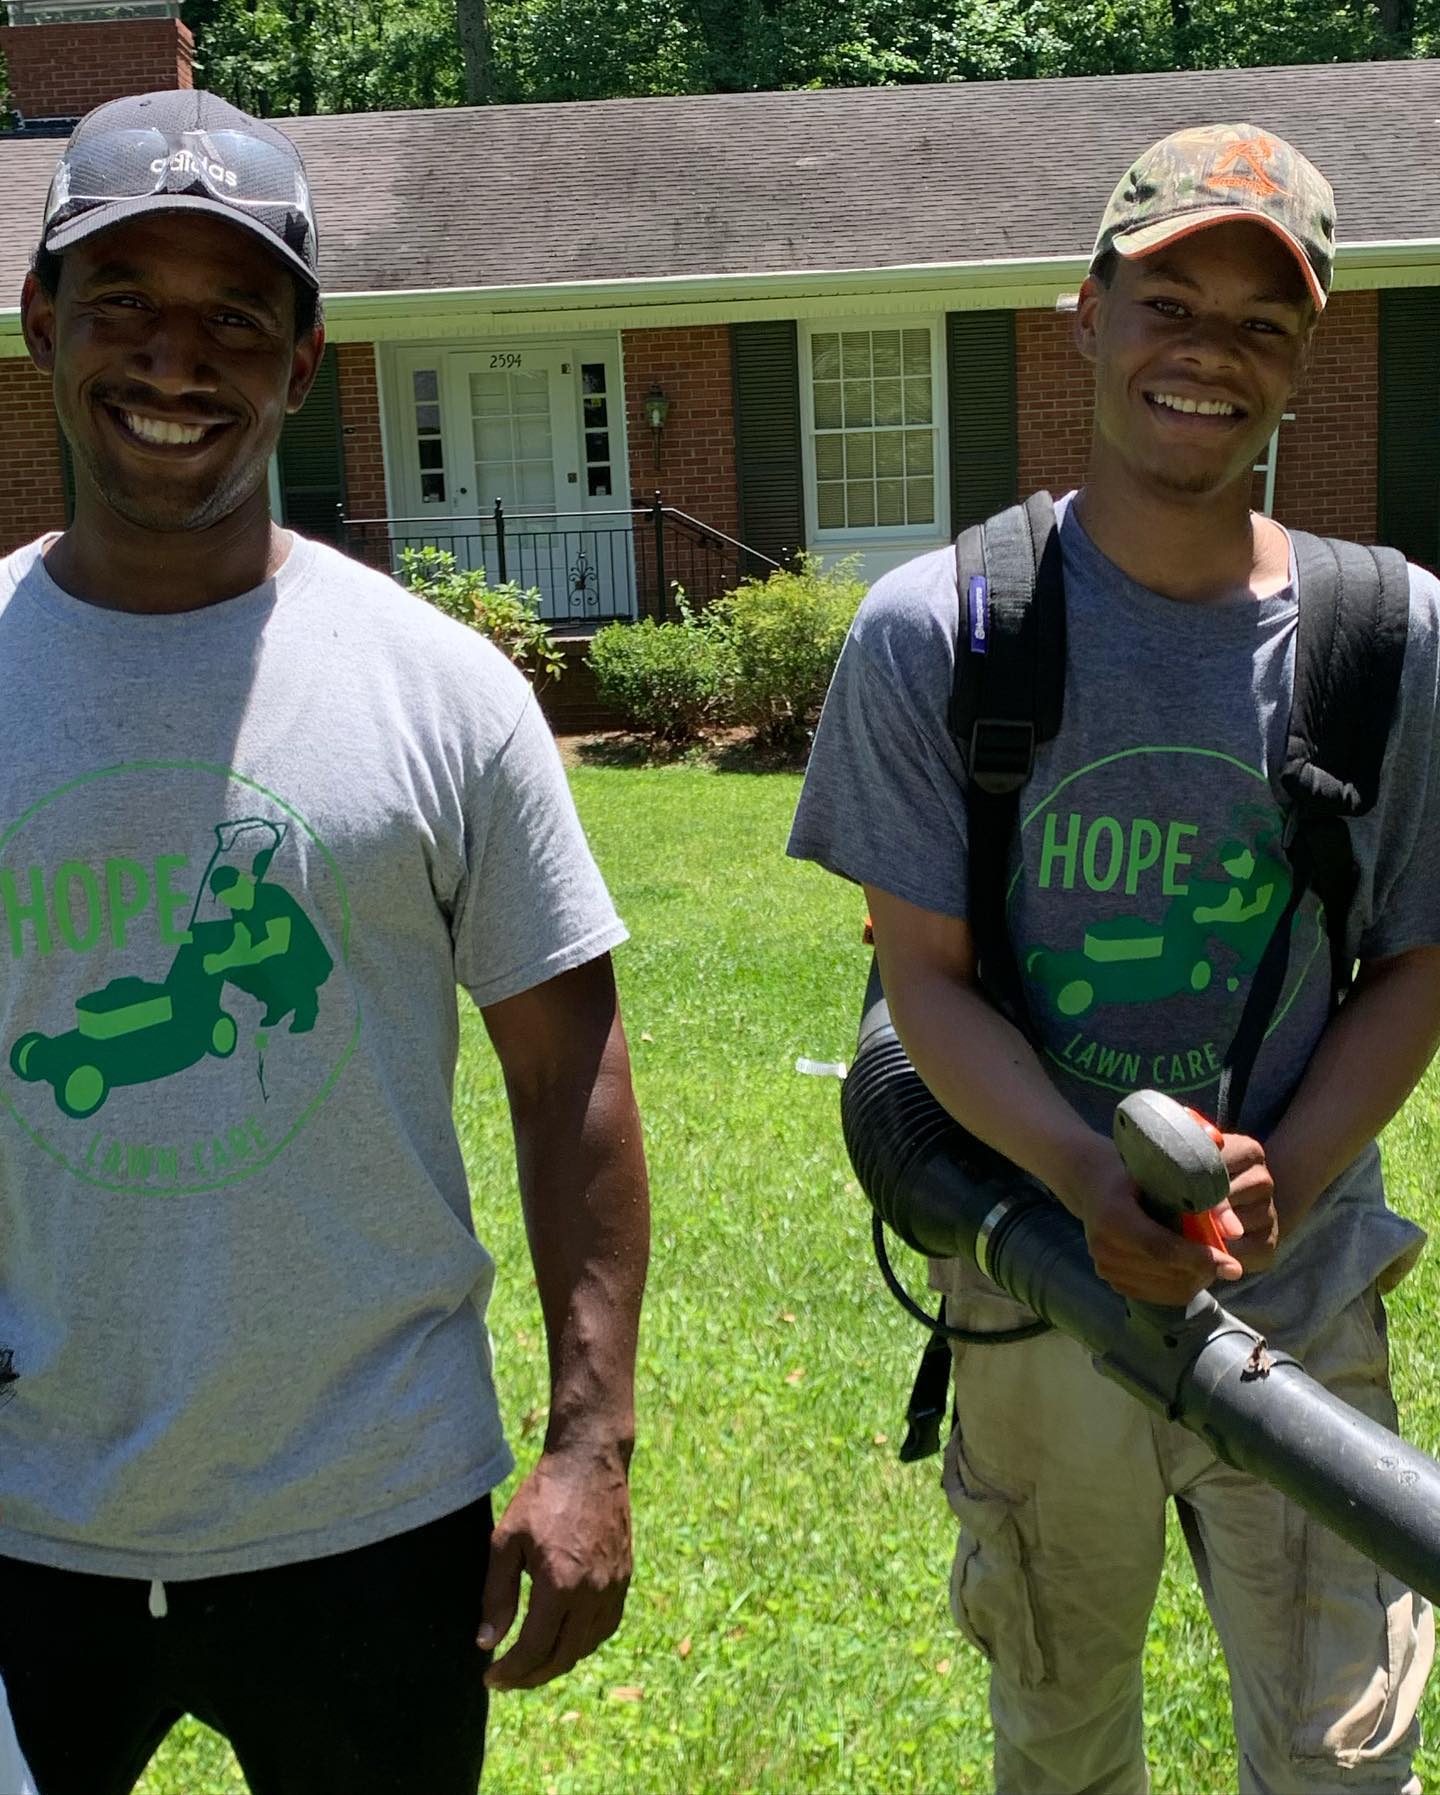 Two lawn care specialists at Hope Lawn care